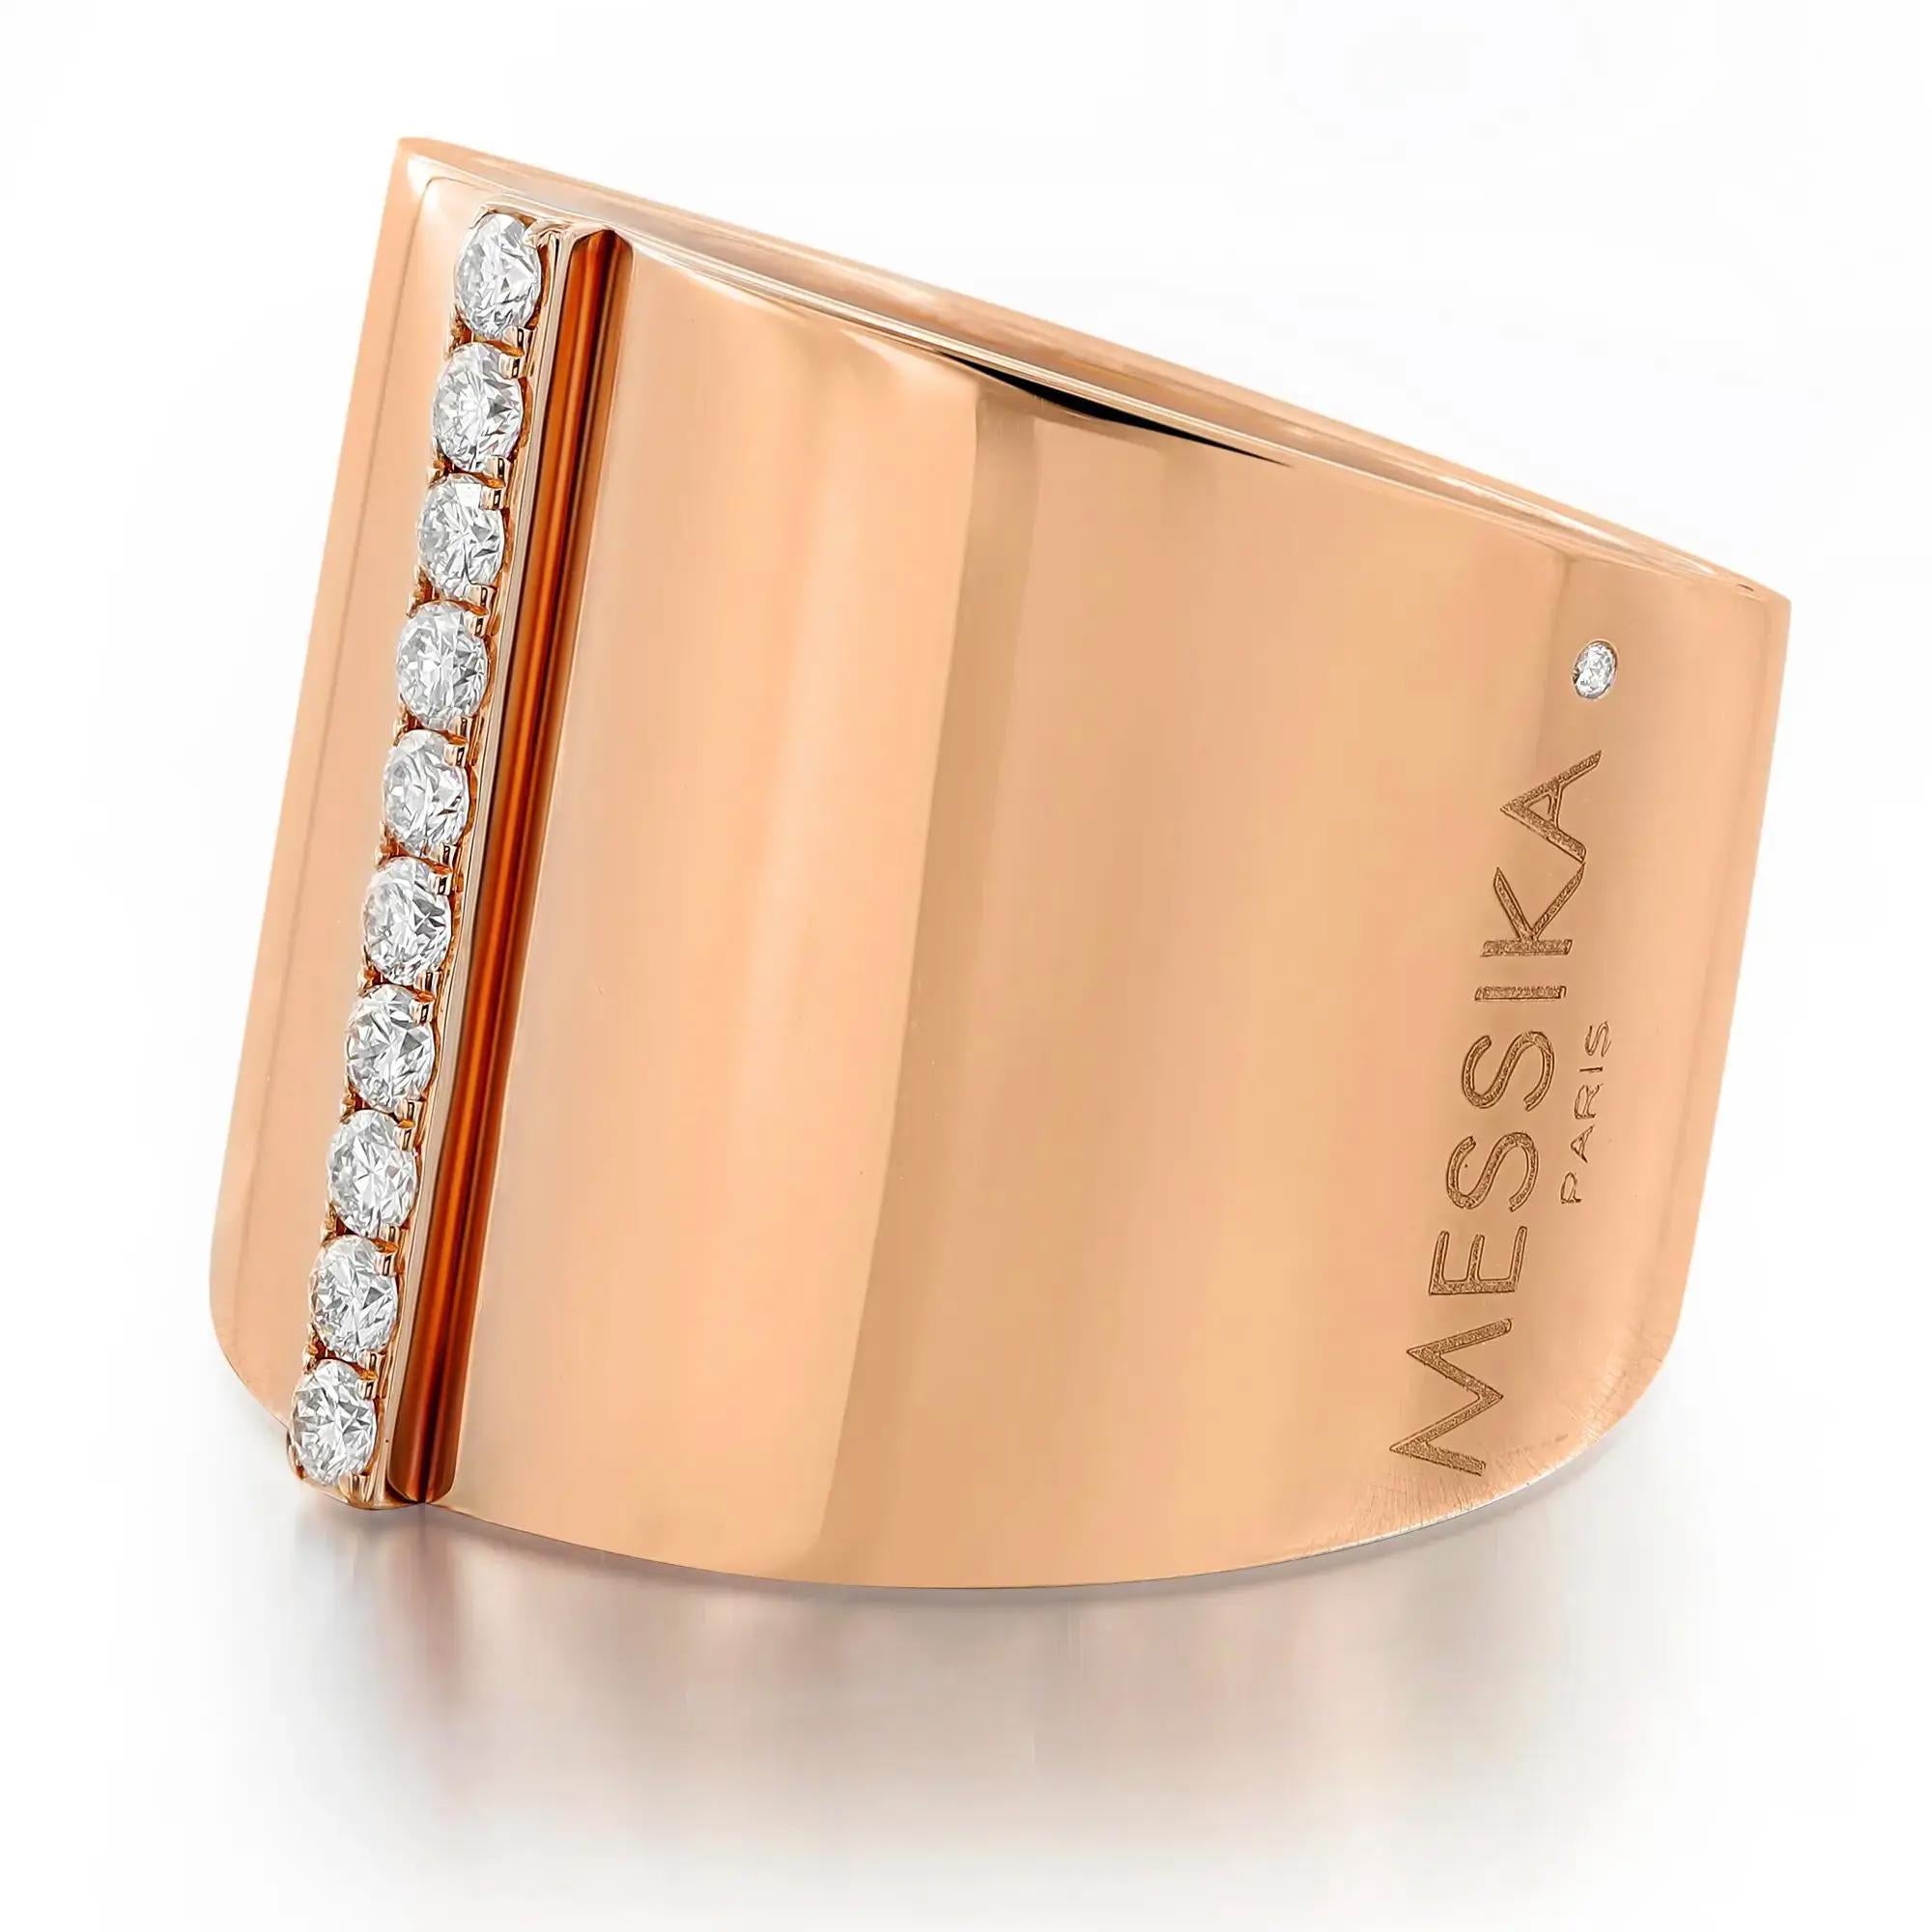 Modern and chic Messika Kate diamond wide band ring crafted in 18K rose gold. This ring is accented with a single row of 10 pave set round brilliant cut diamonds in the center. Total diamond weight: 0.17 carats. Diamond quality: color G and clarity